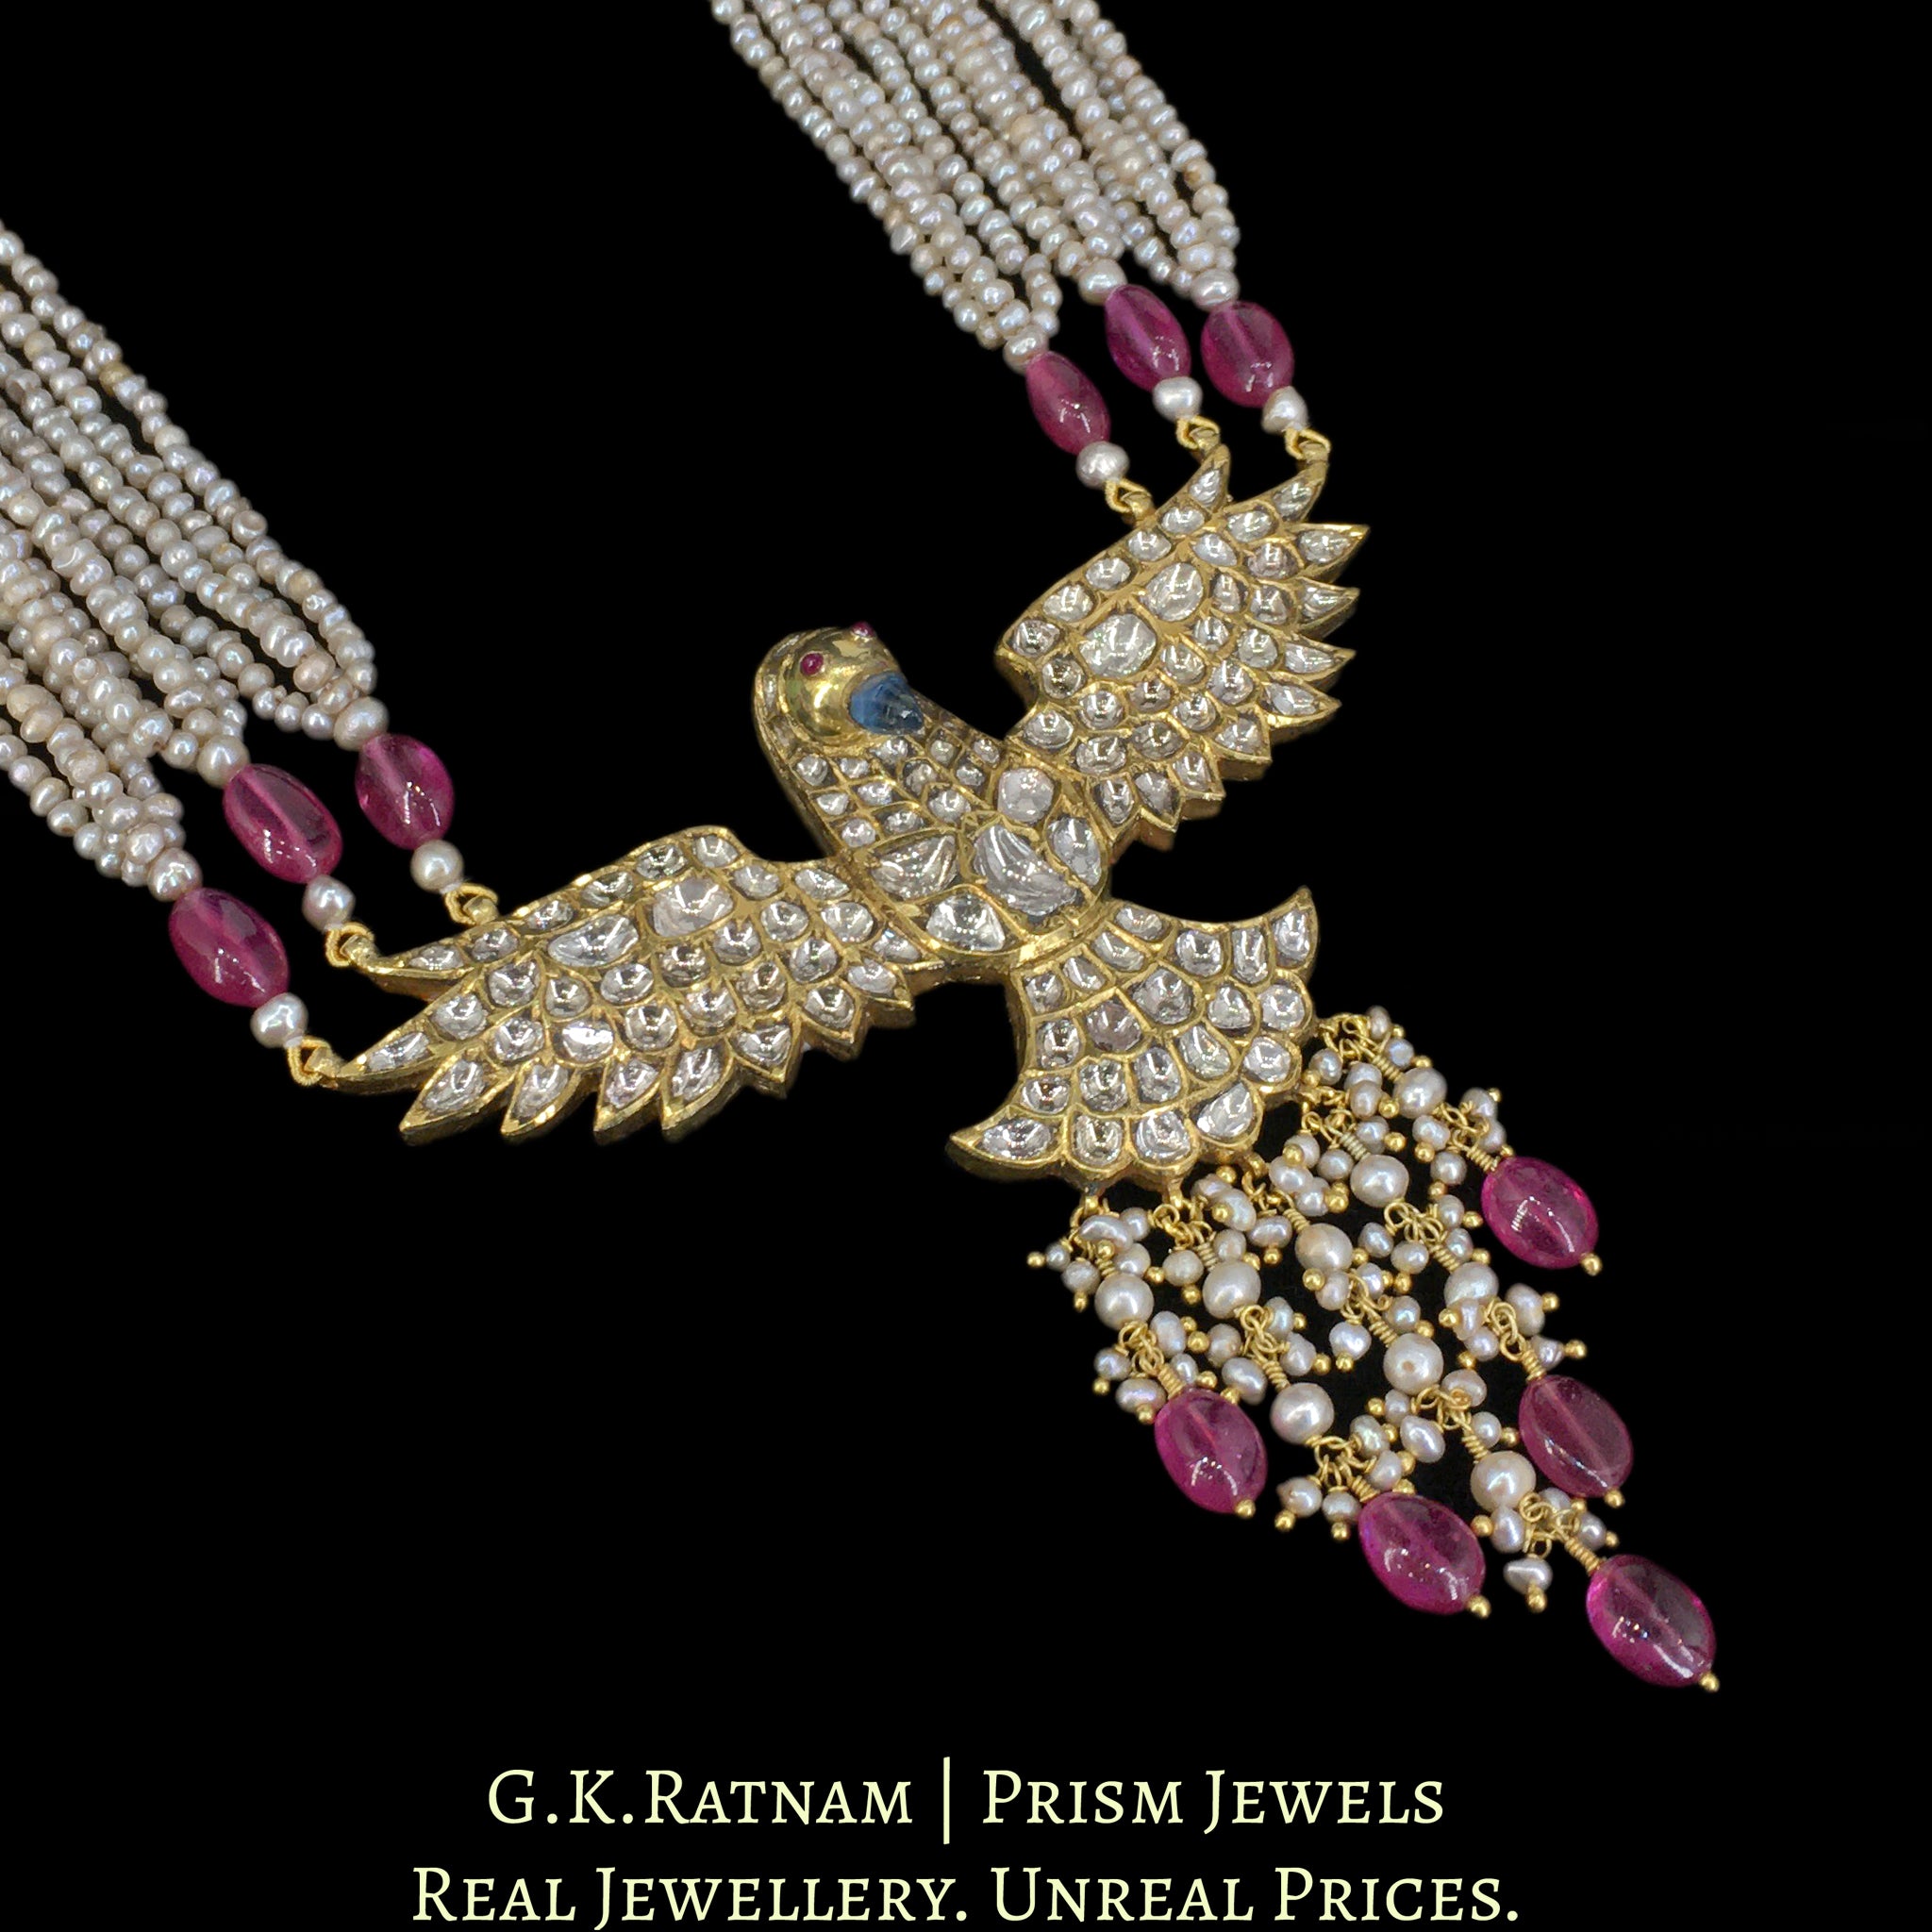 18k Gold and Diamond Polki Eagle Pendant with Antiqued Freshwater Pearls and Rubies